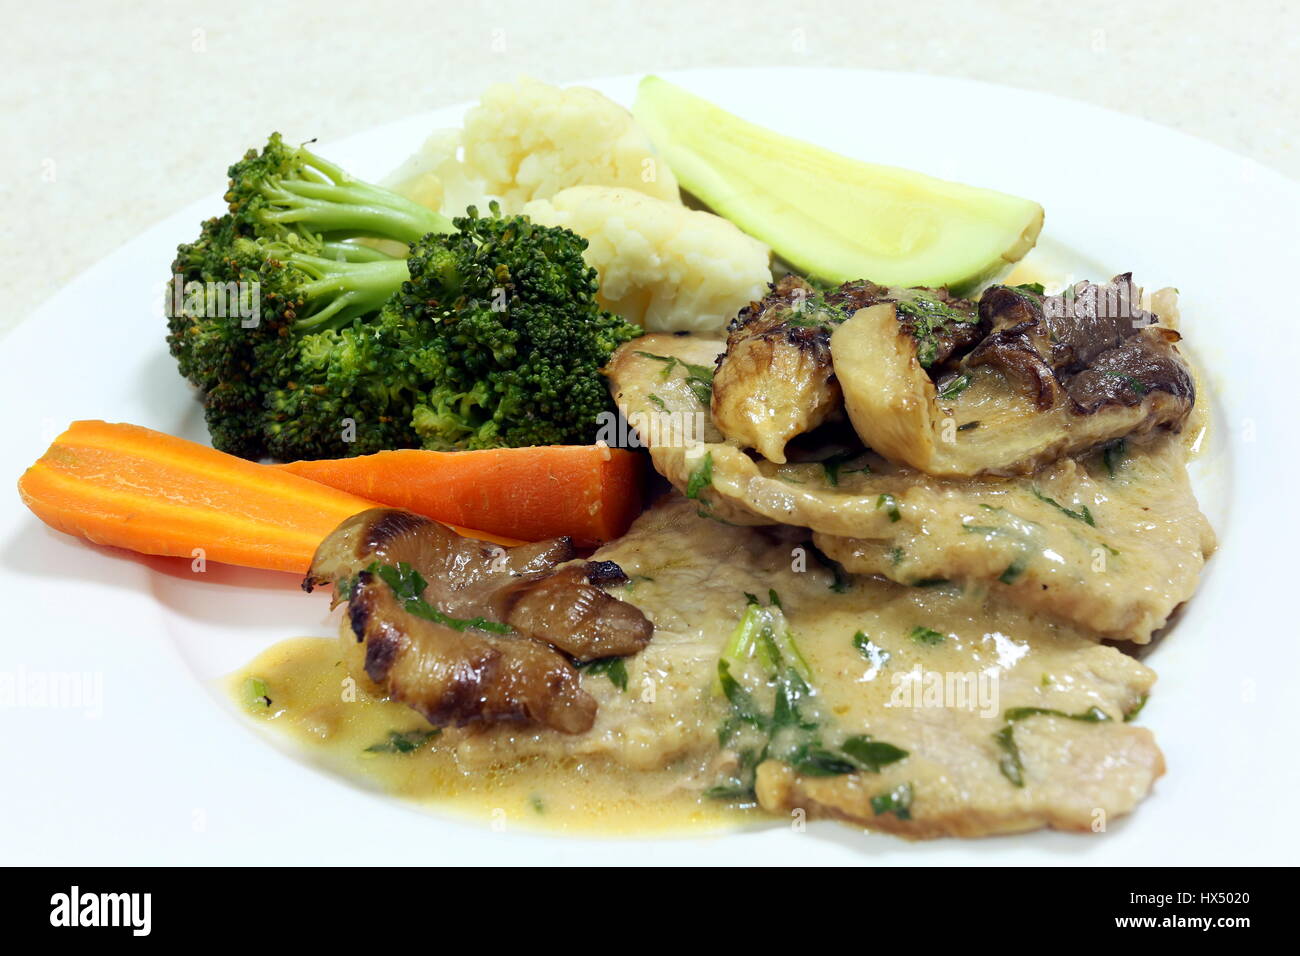 Slices of veal and oyster mushrooms in a creamy sauce with steamed carrots, cauliflower, courgette and broccoli, side view Stock Photo